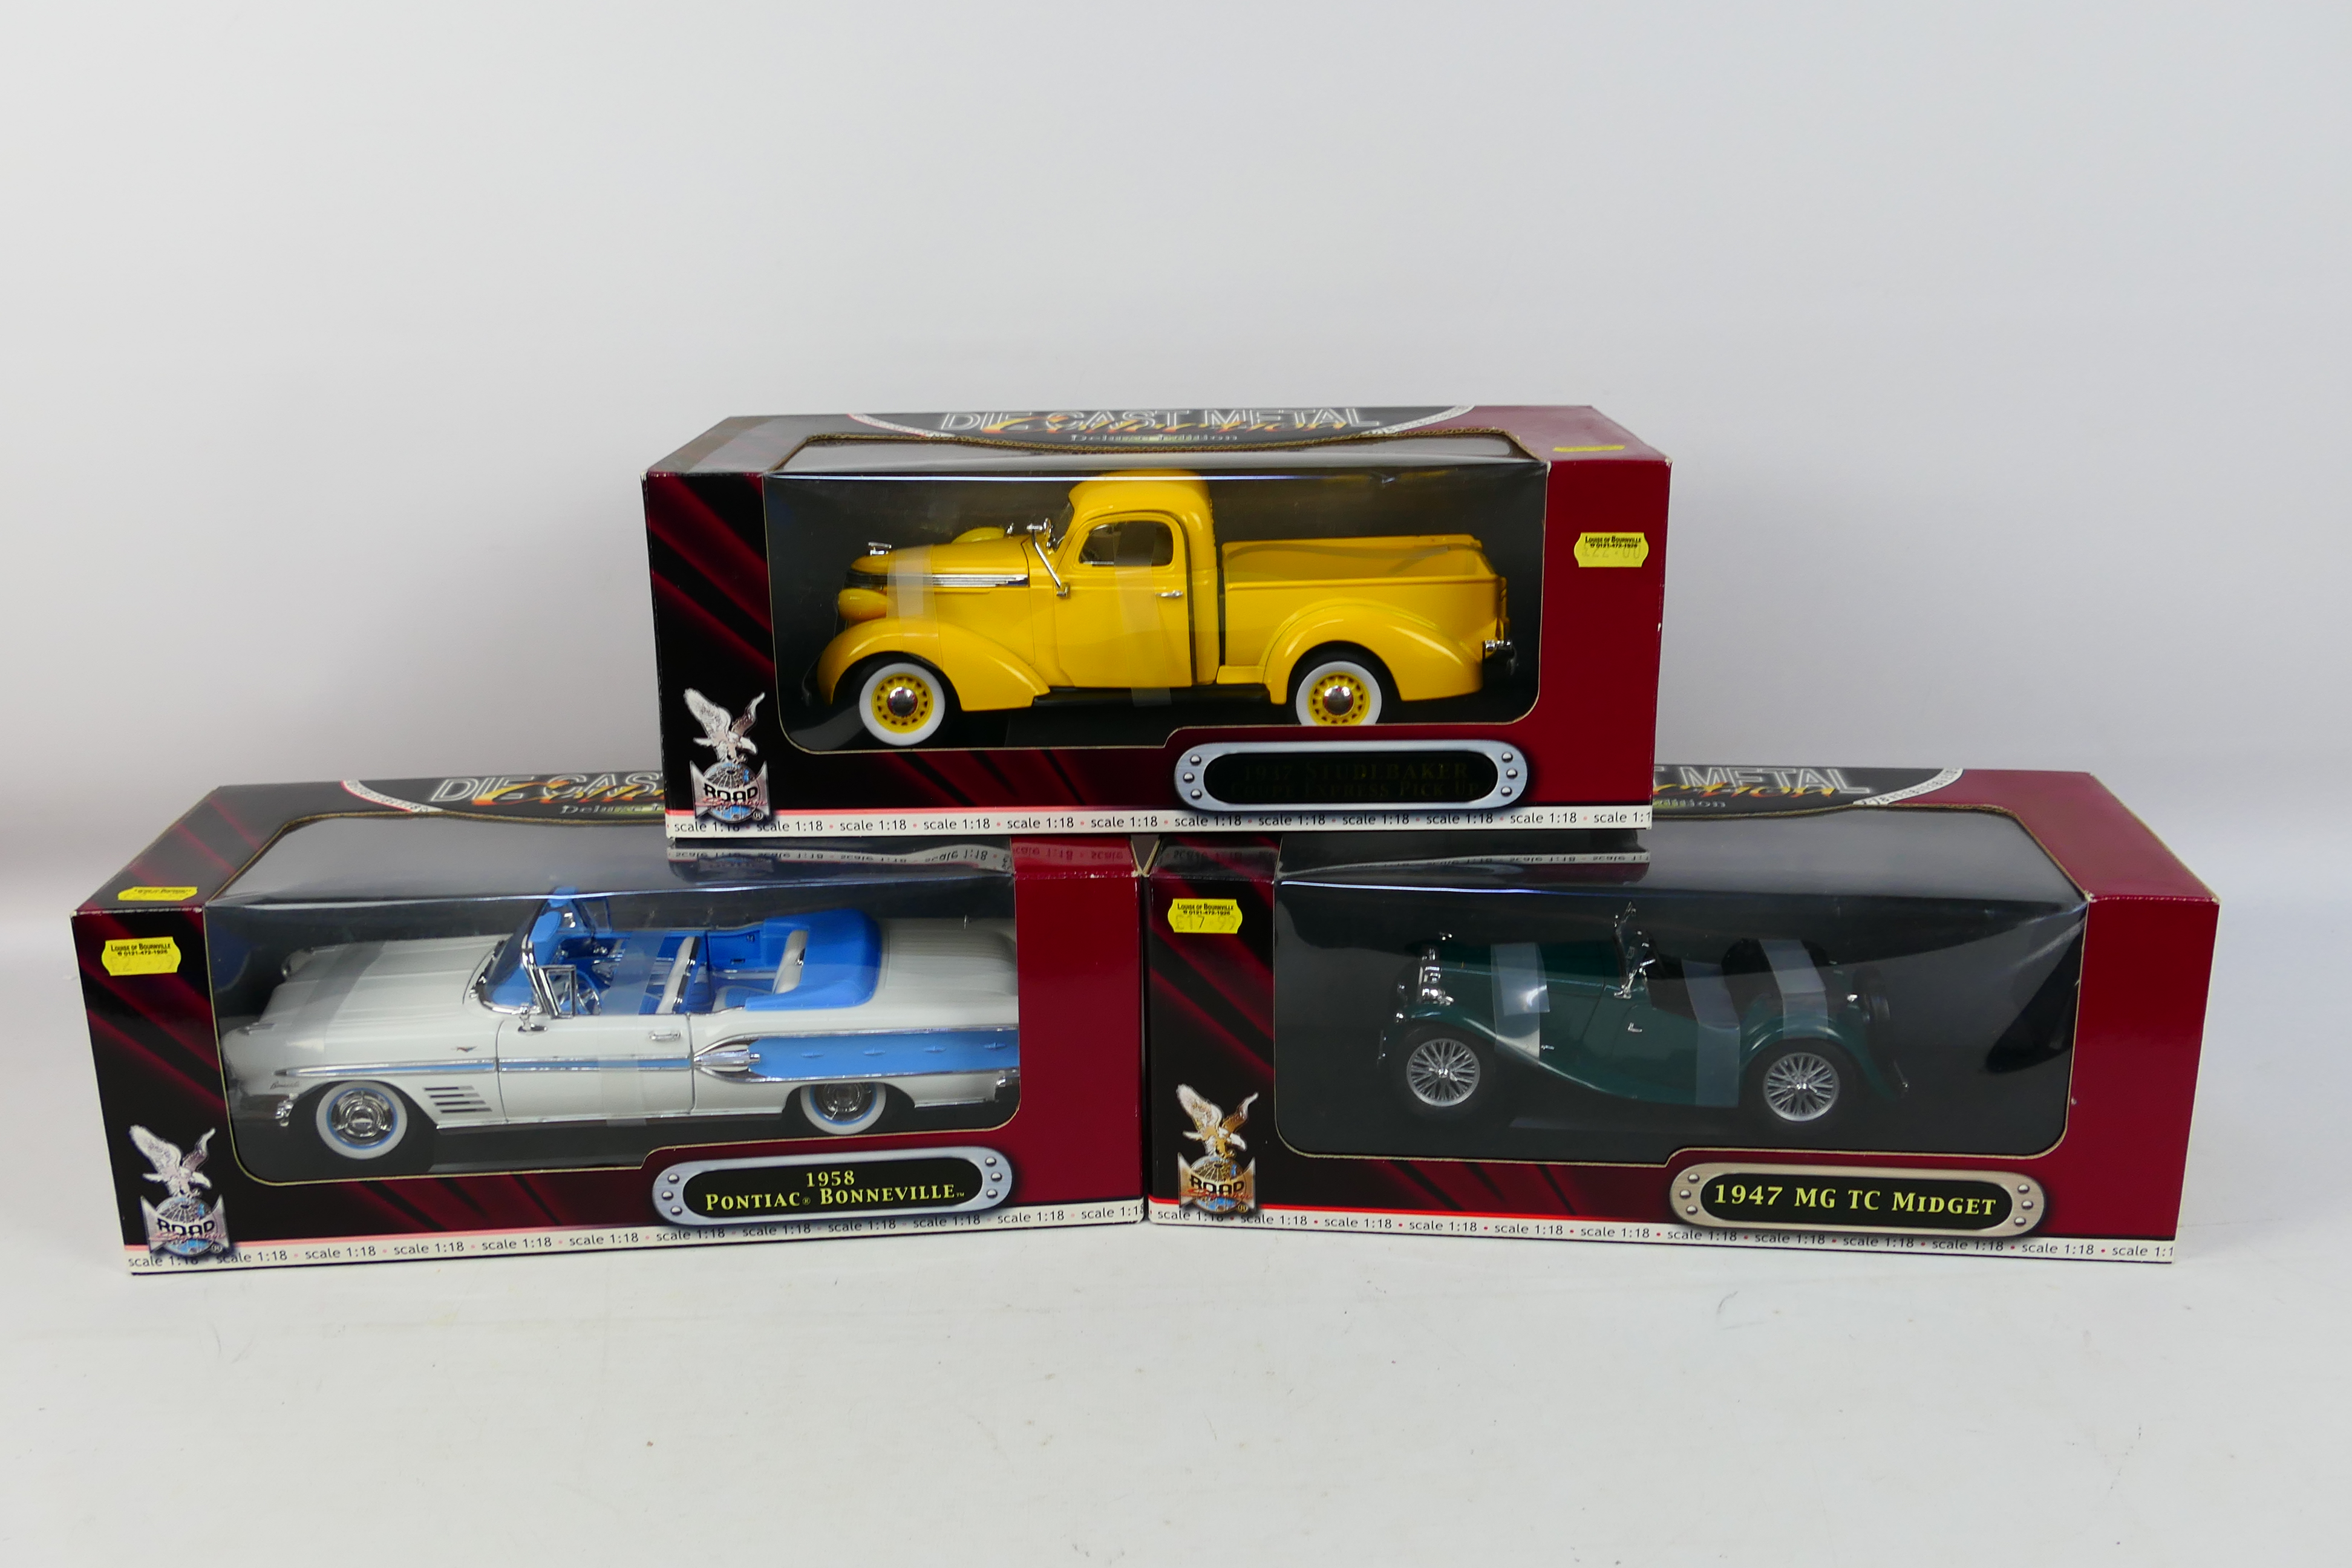 Road Signature - Three boxed 1:18 scale diecast model cars from Road Signature.